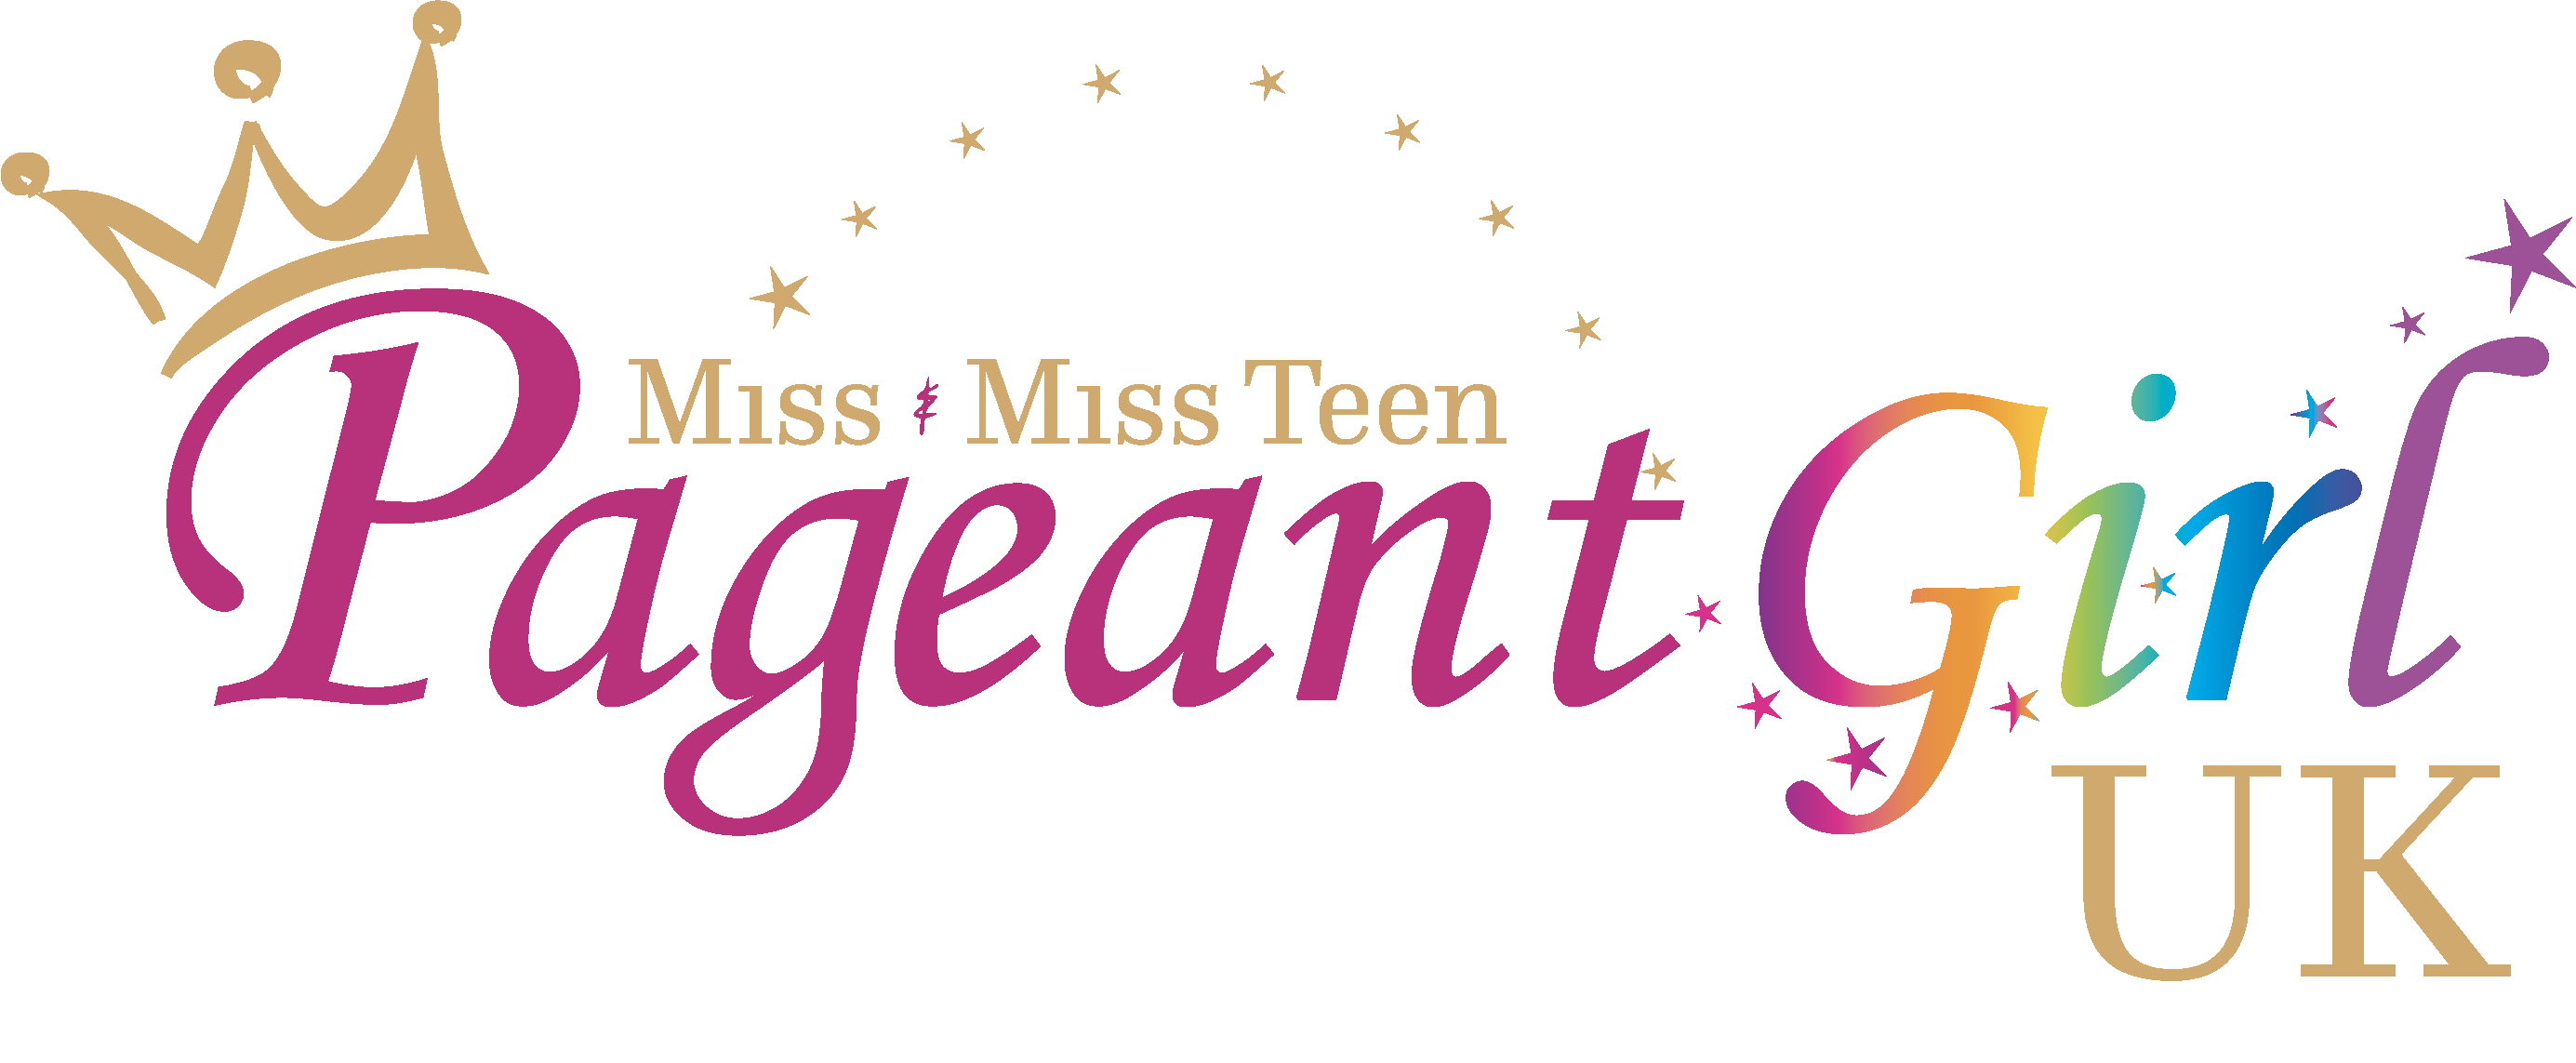 Junior nackt miss pageant search